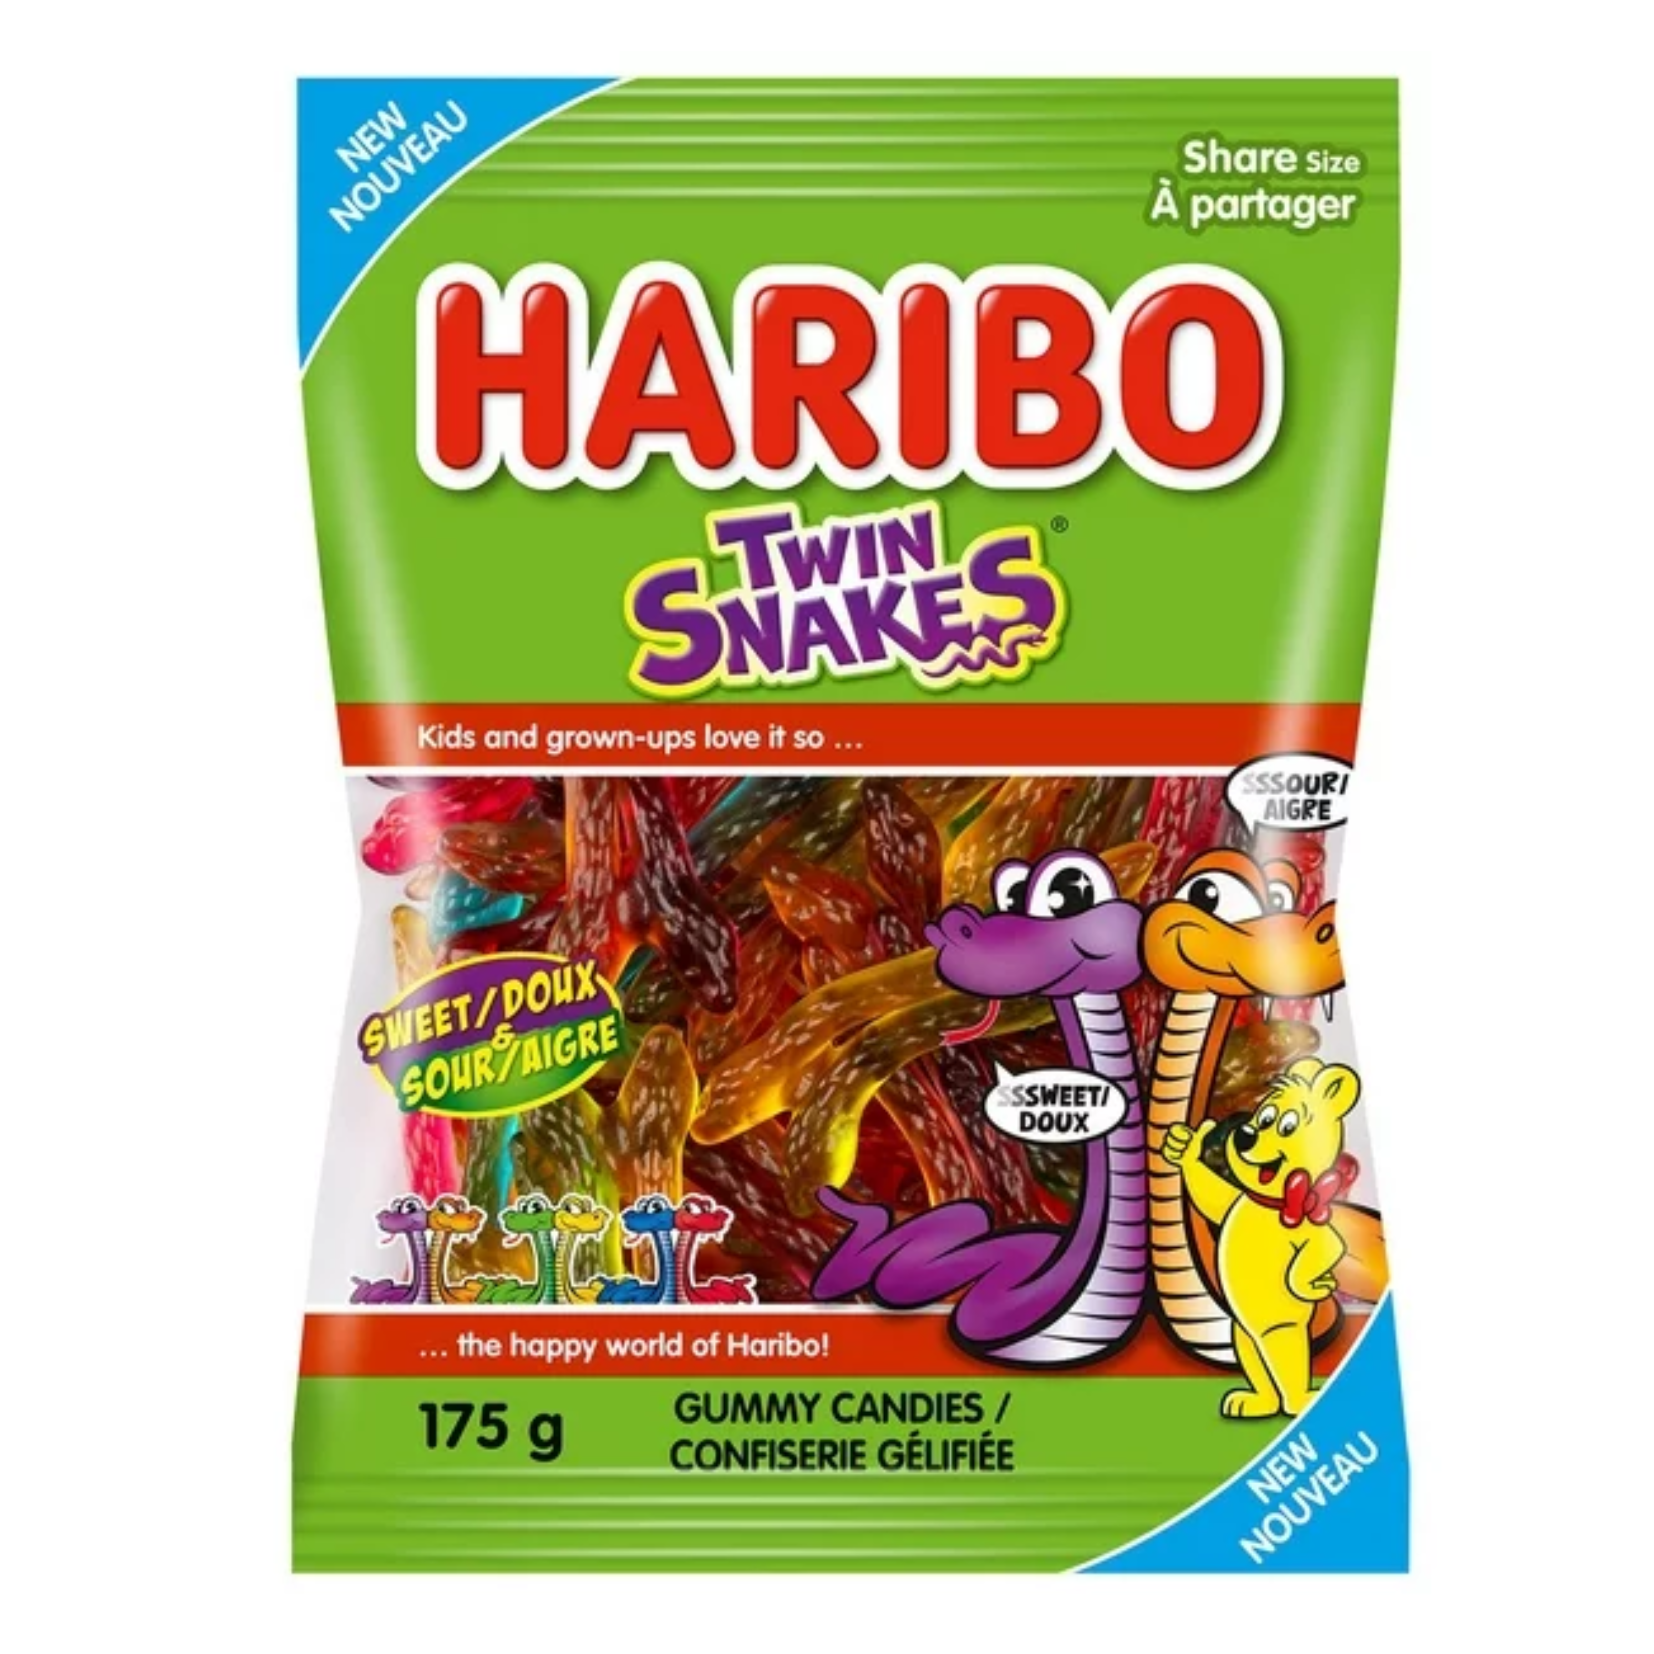 Haribo Twin Snakes Gummy Candies 175g